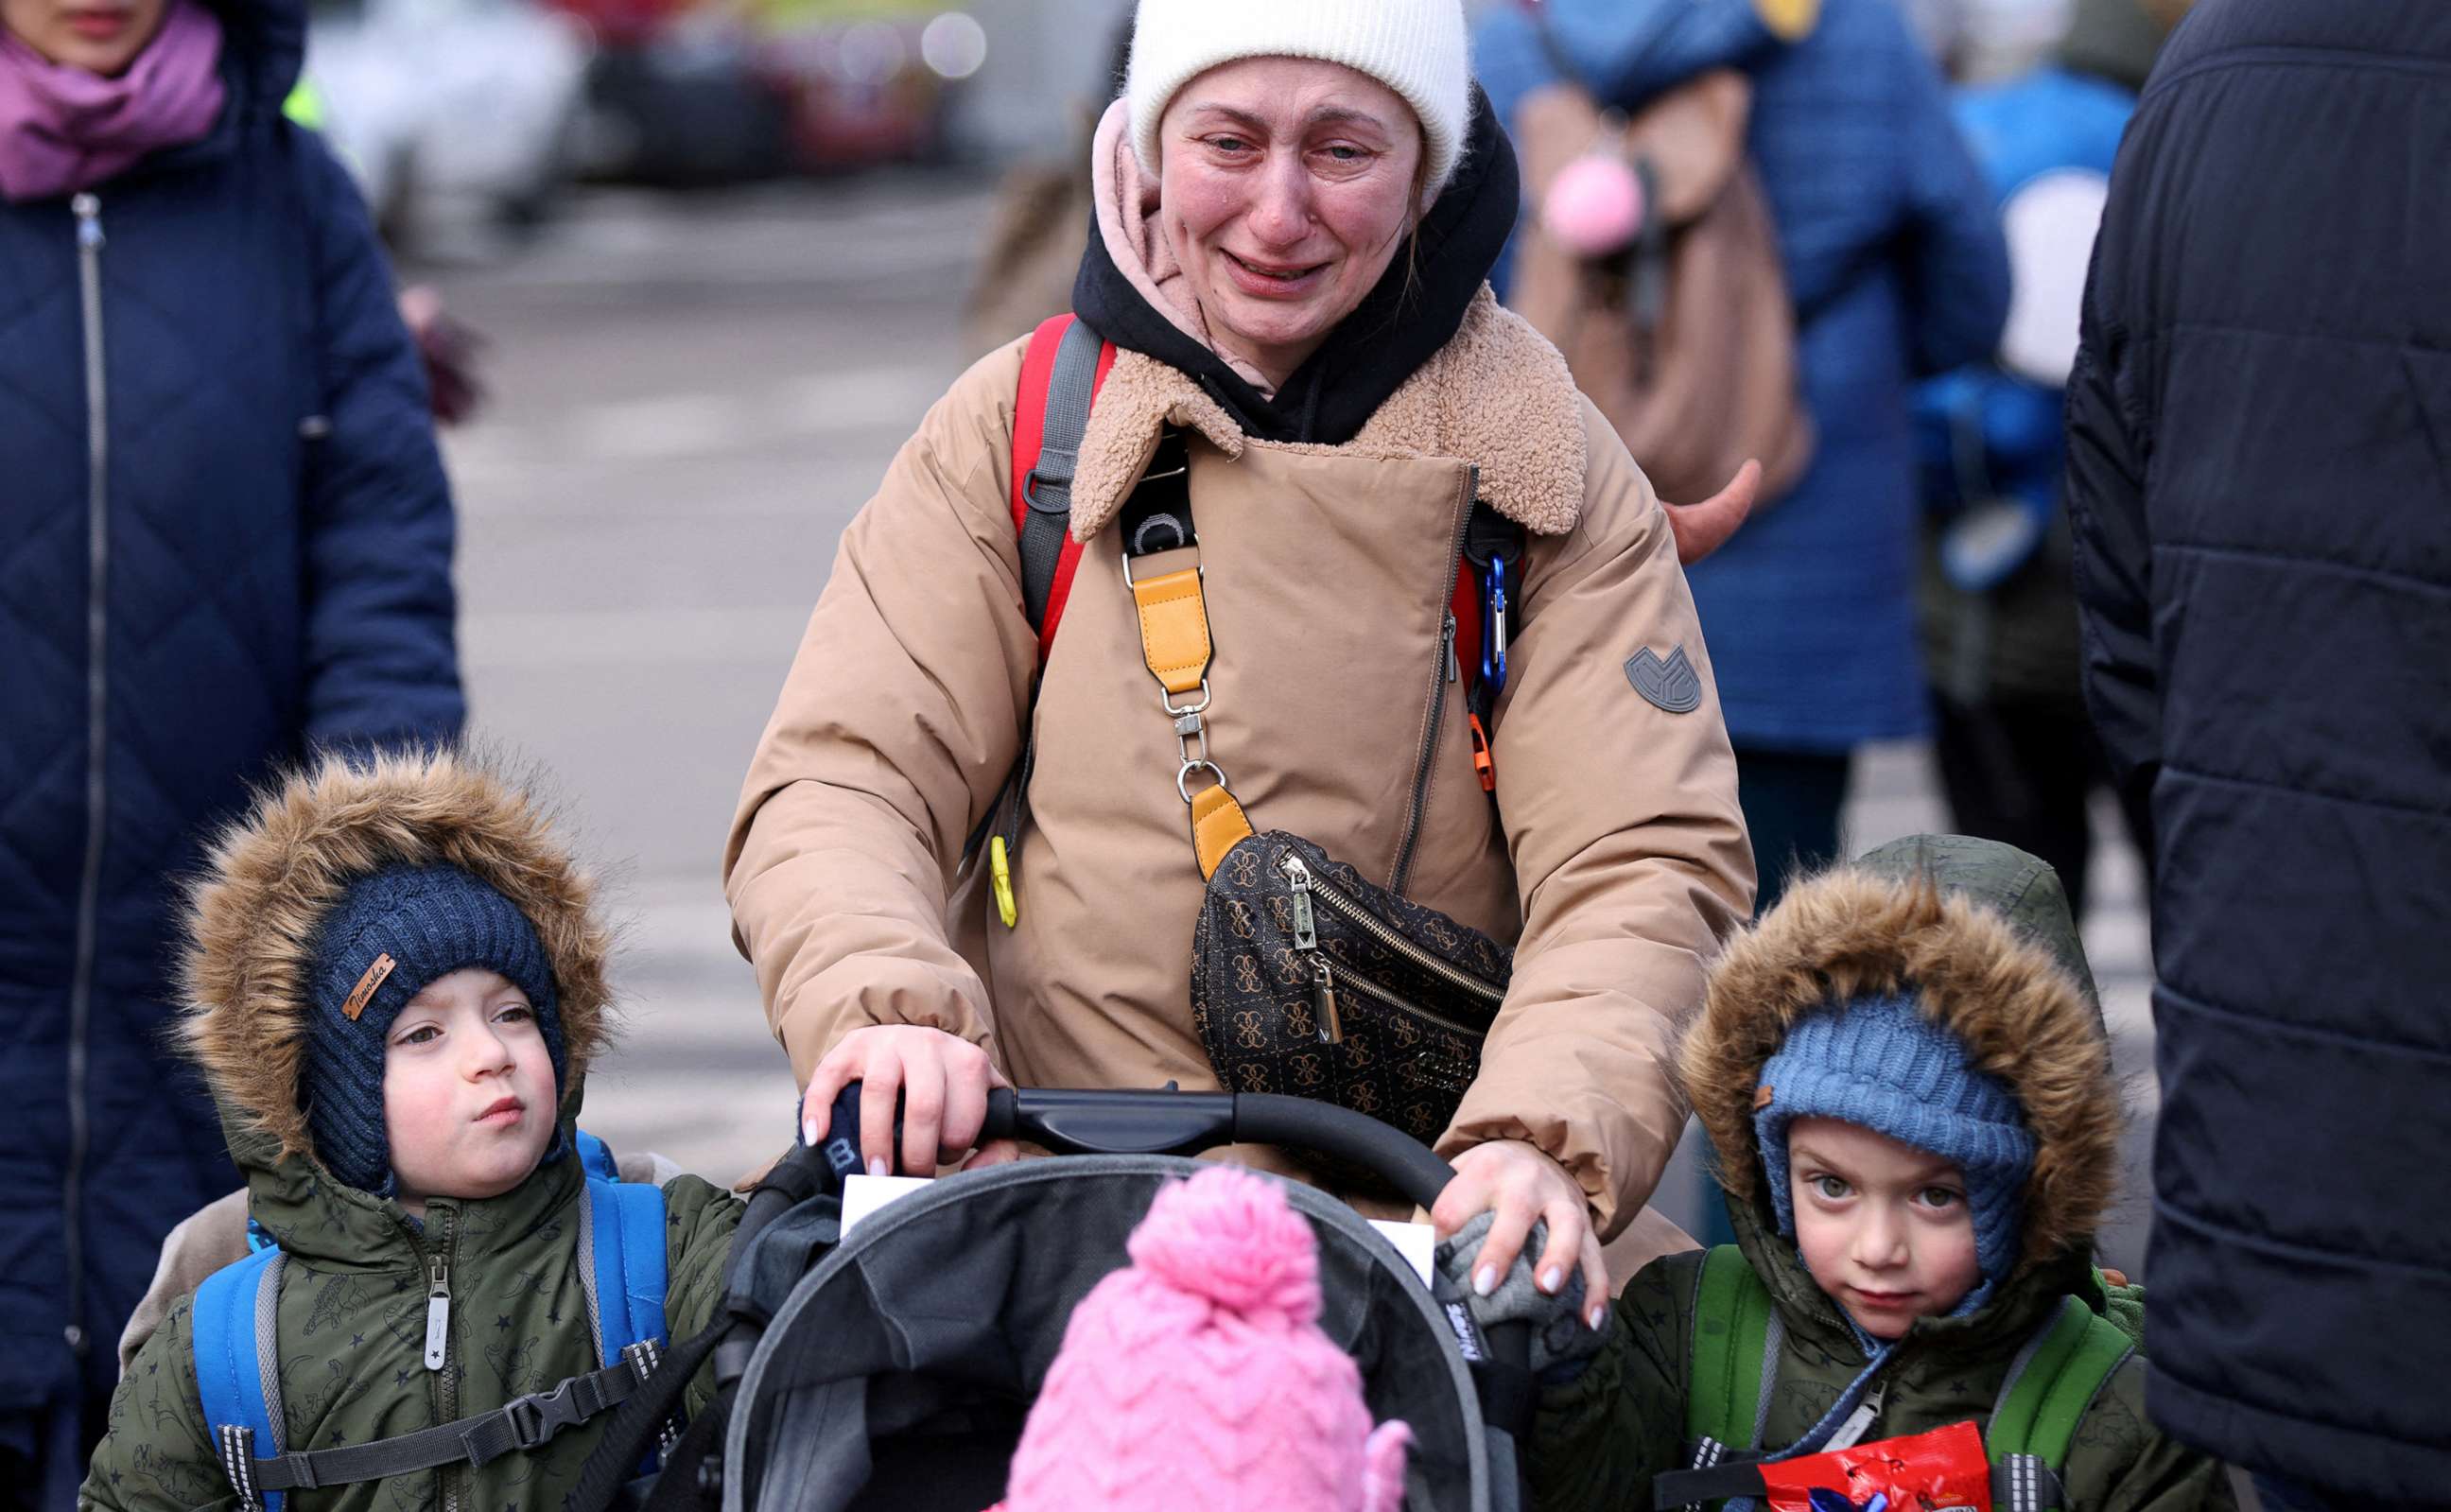 PHOTO: A woman cries as she walks with her children after fleeing from Russia's invasion of Ukraine, at the border crossing in Siret, Romania, Feb. 28, 2022.